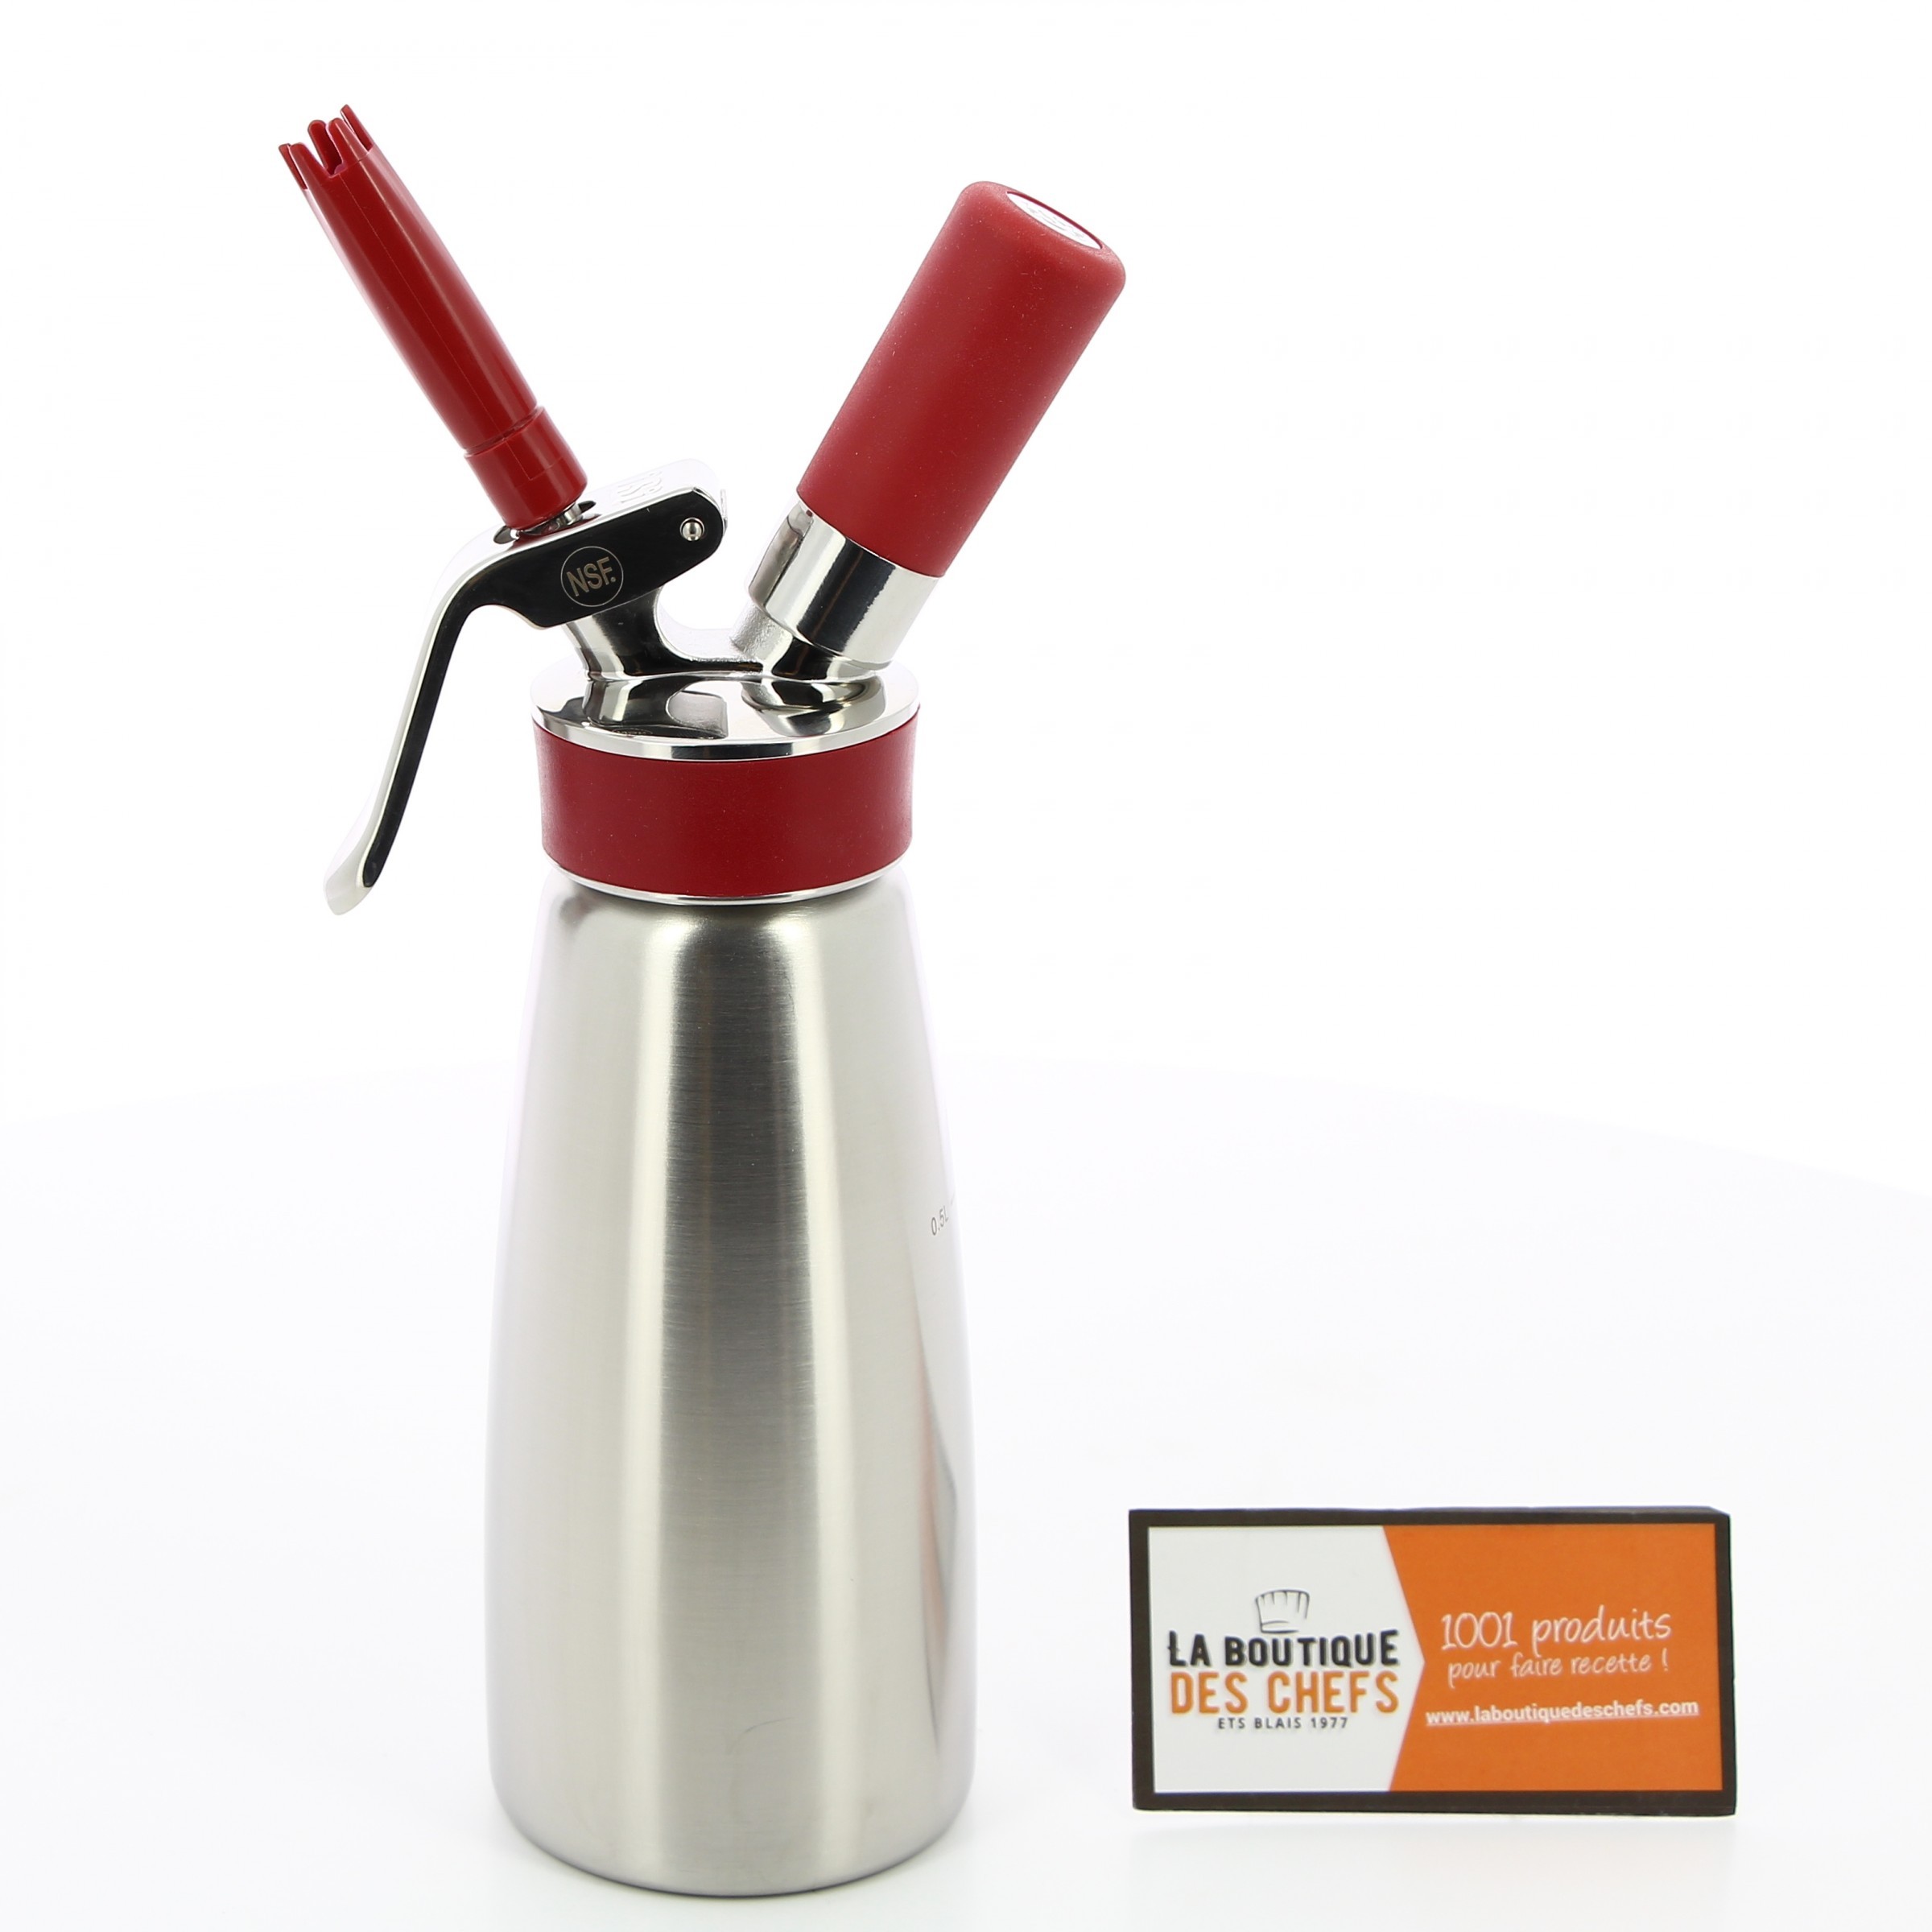 https://www.laboutiquedeschefs.com/media/images/products/w-2400-h-2400-zc-5-siphon-a-chantilly-gourmet-whip-professionnel-05-litre-7-1564490310.jpg